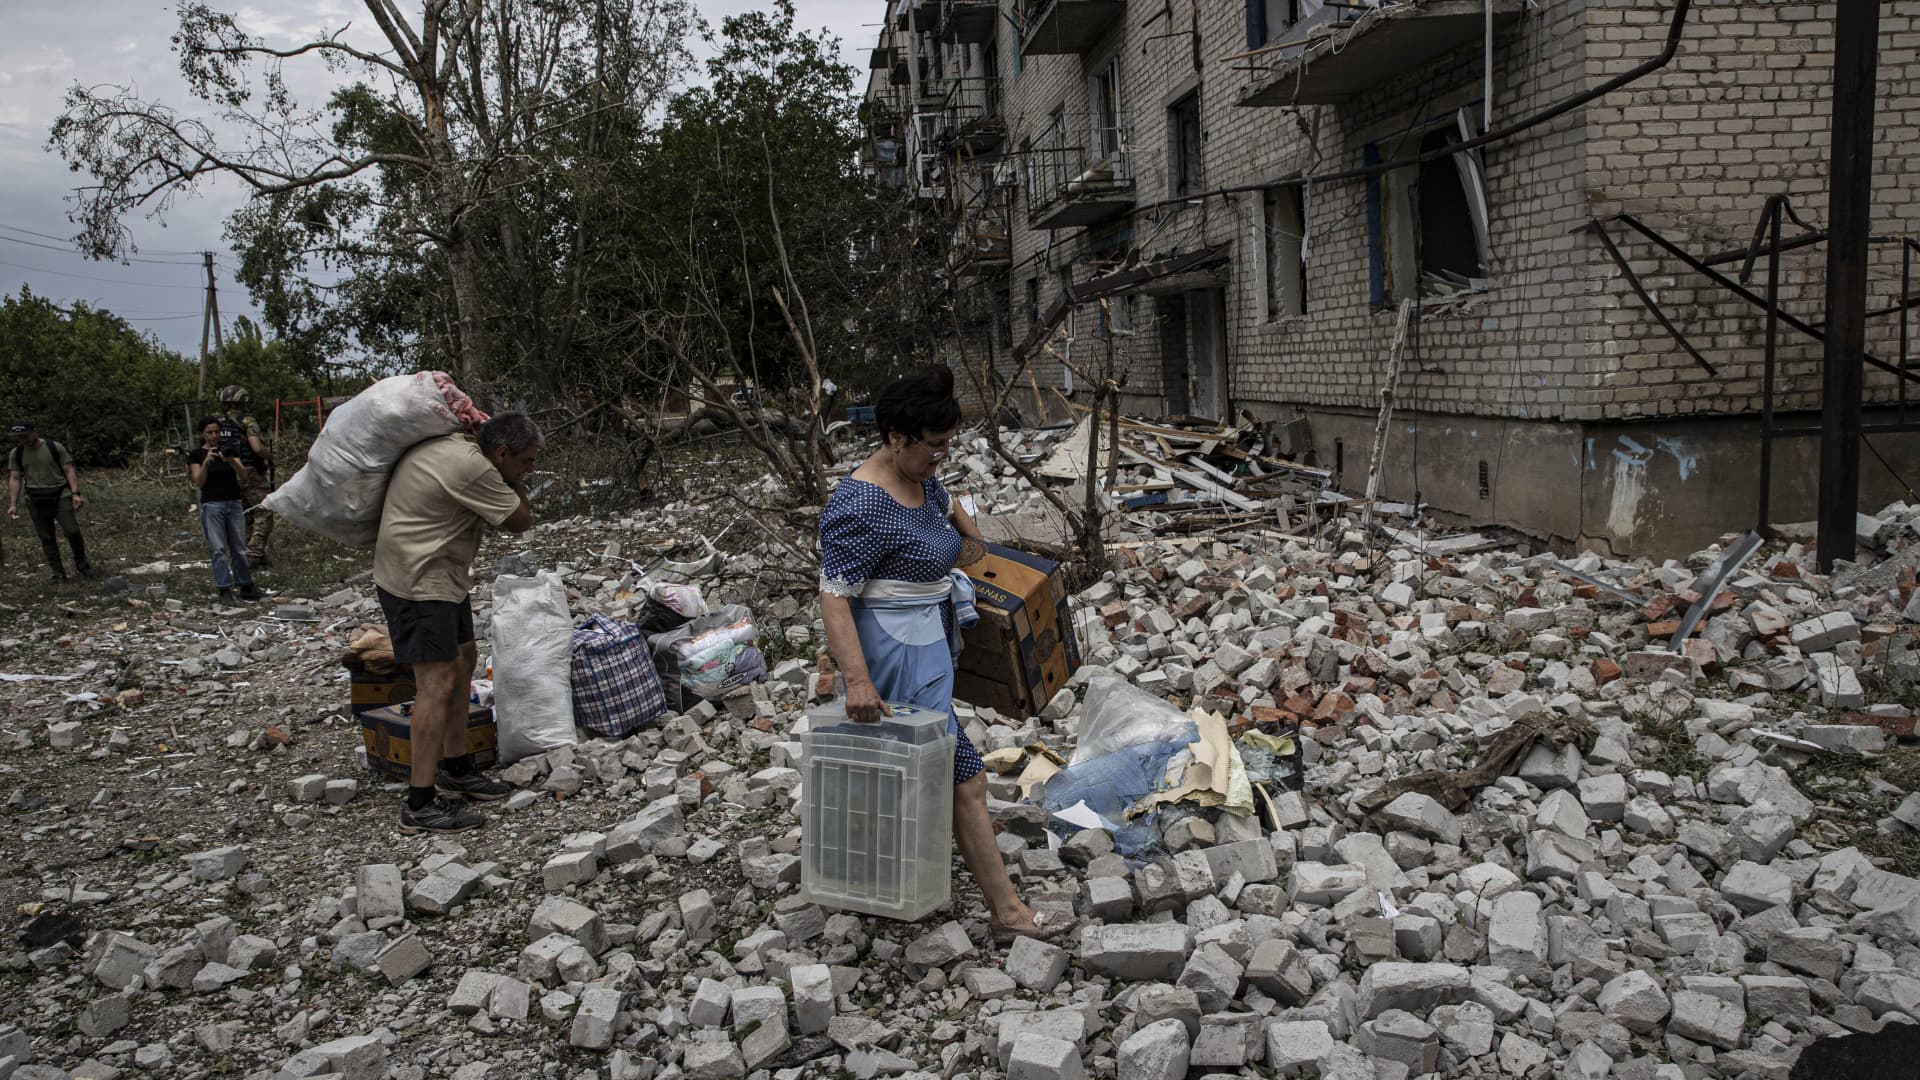 Ukrainians salvage the belongings they can after an airstrike on their apartment block in Chasiv Yar, Donetsk Oblast.